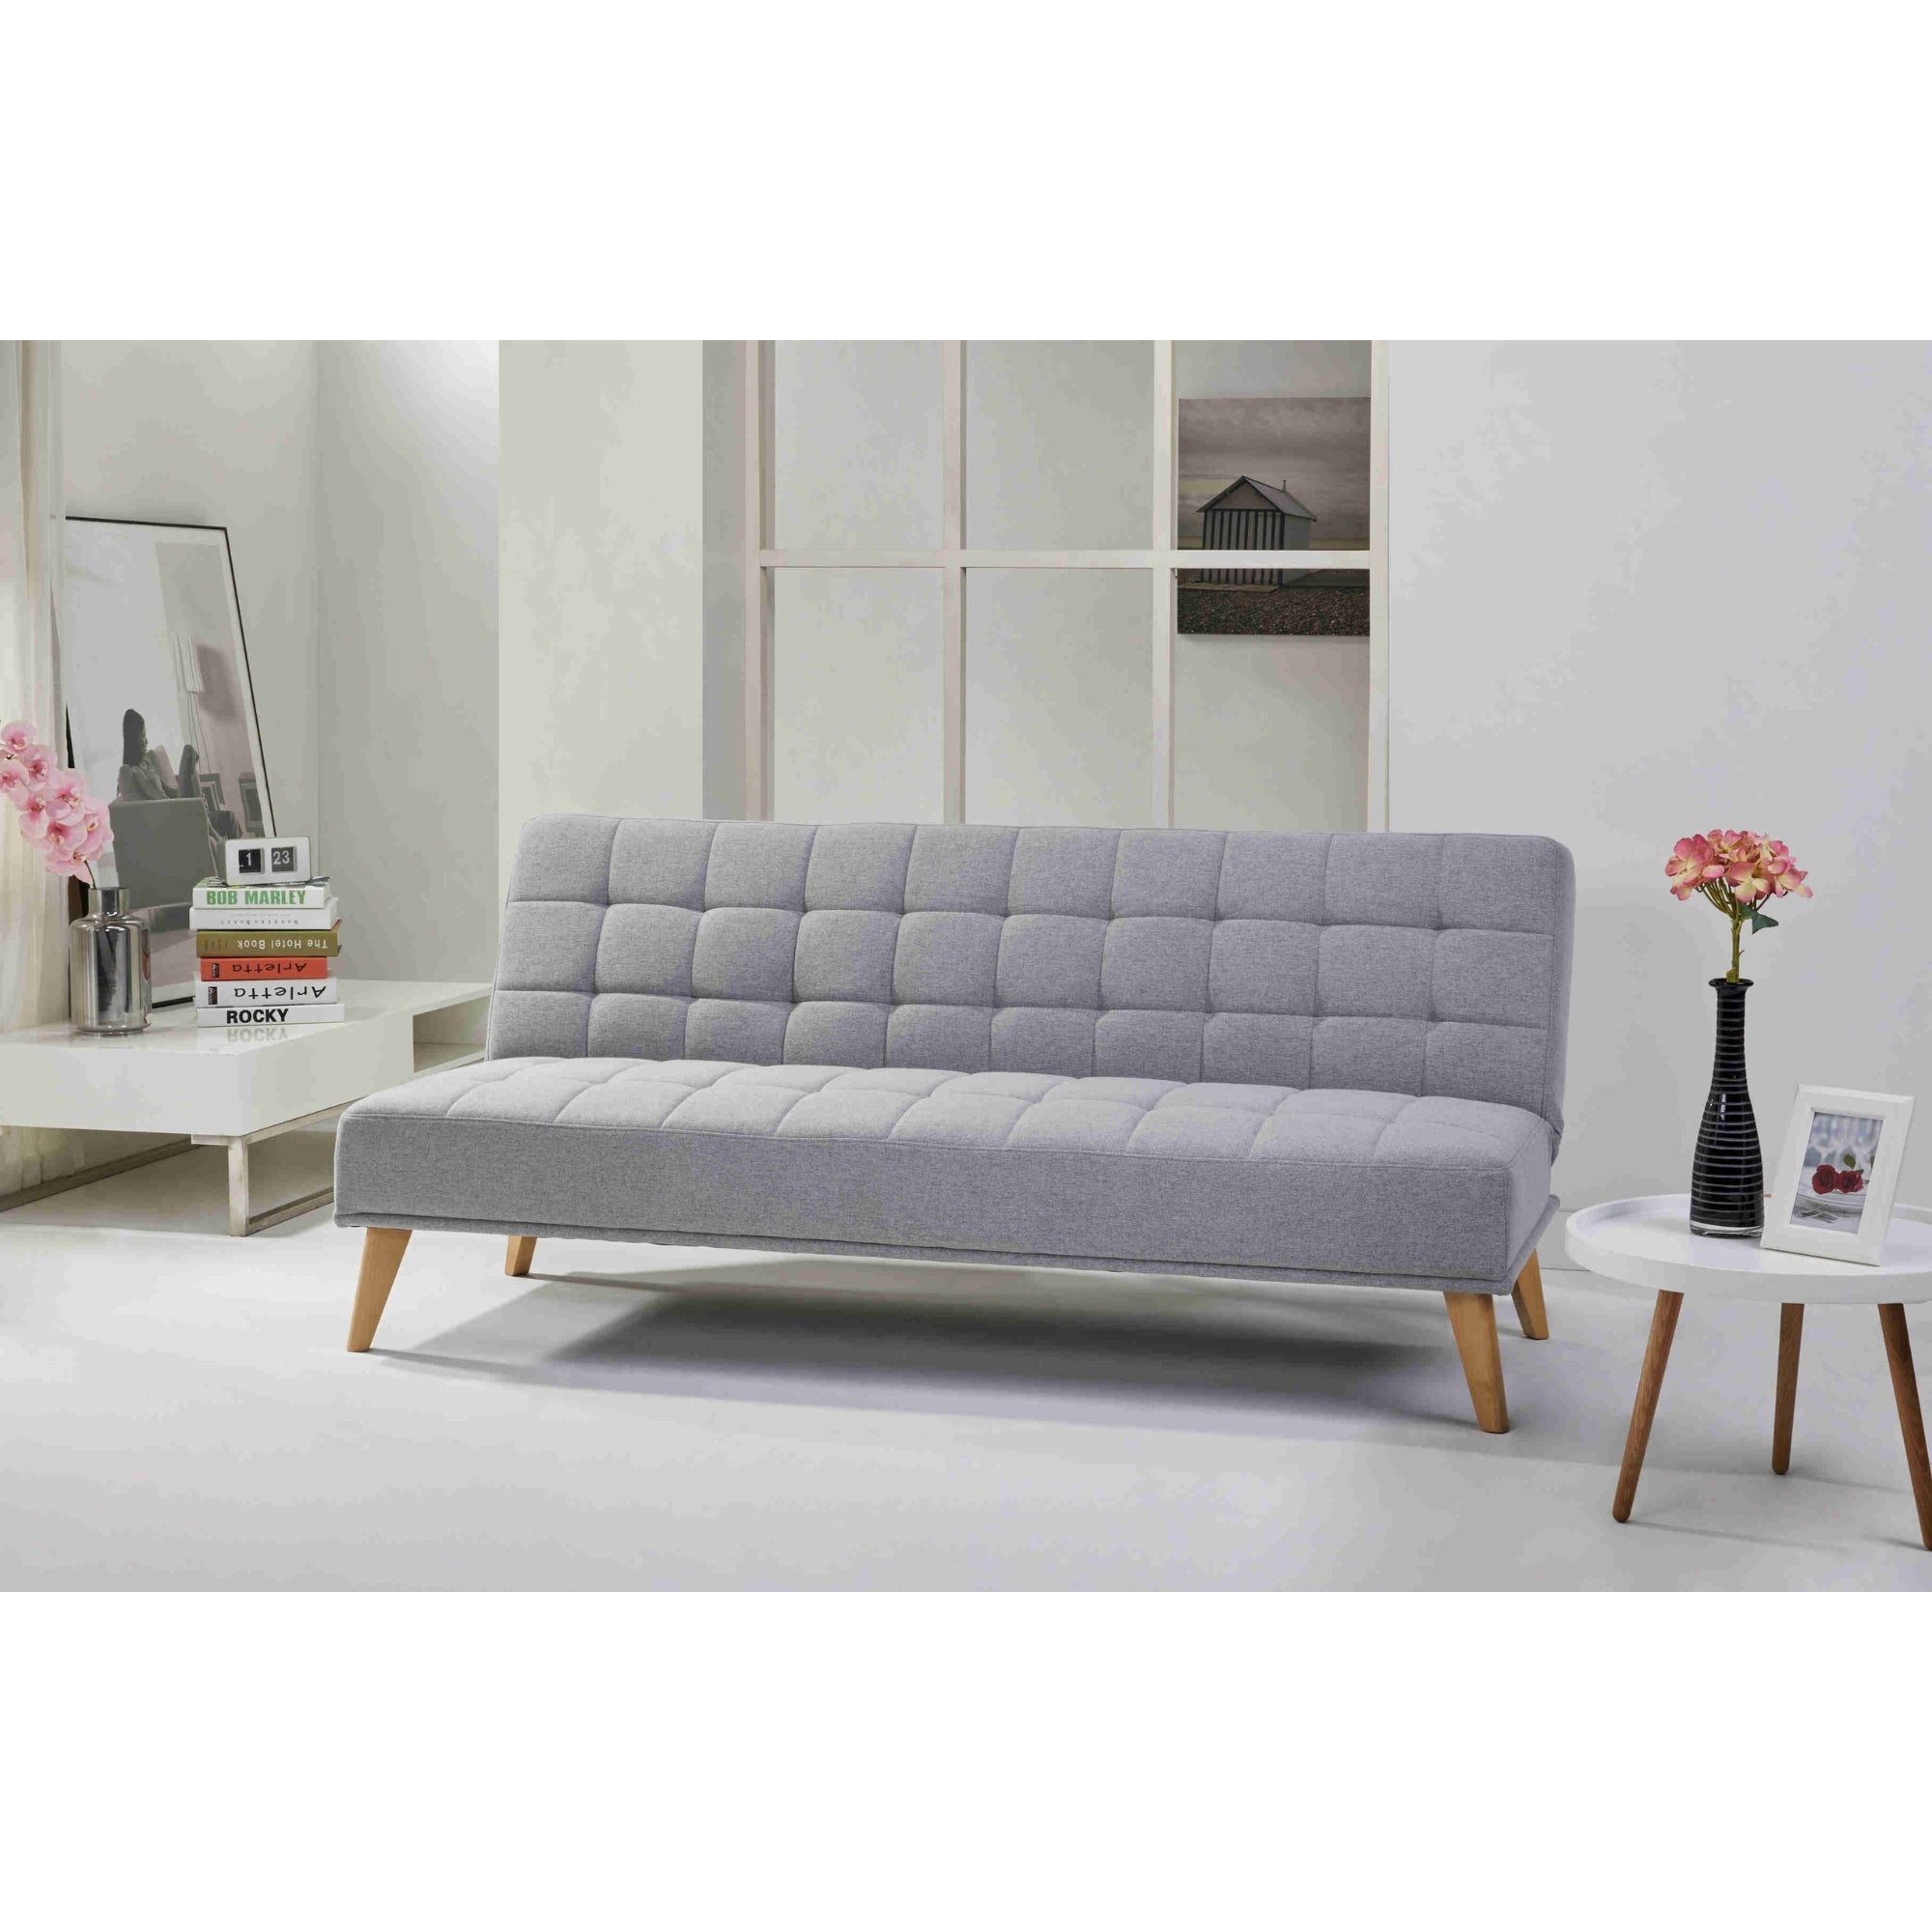 Grey 3 Seater Sofa Bed, Upholstered, Wooden Legs